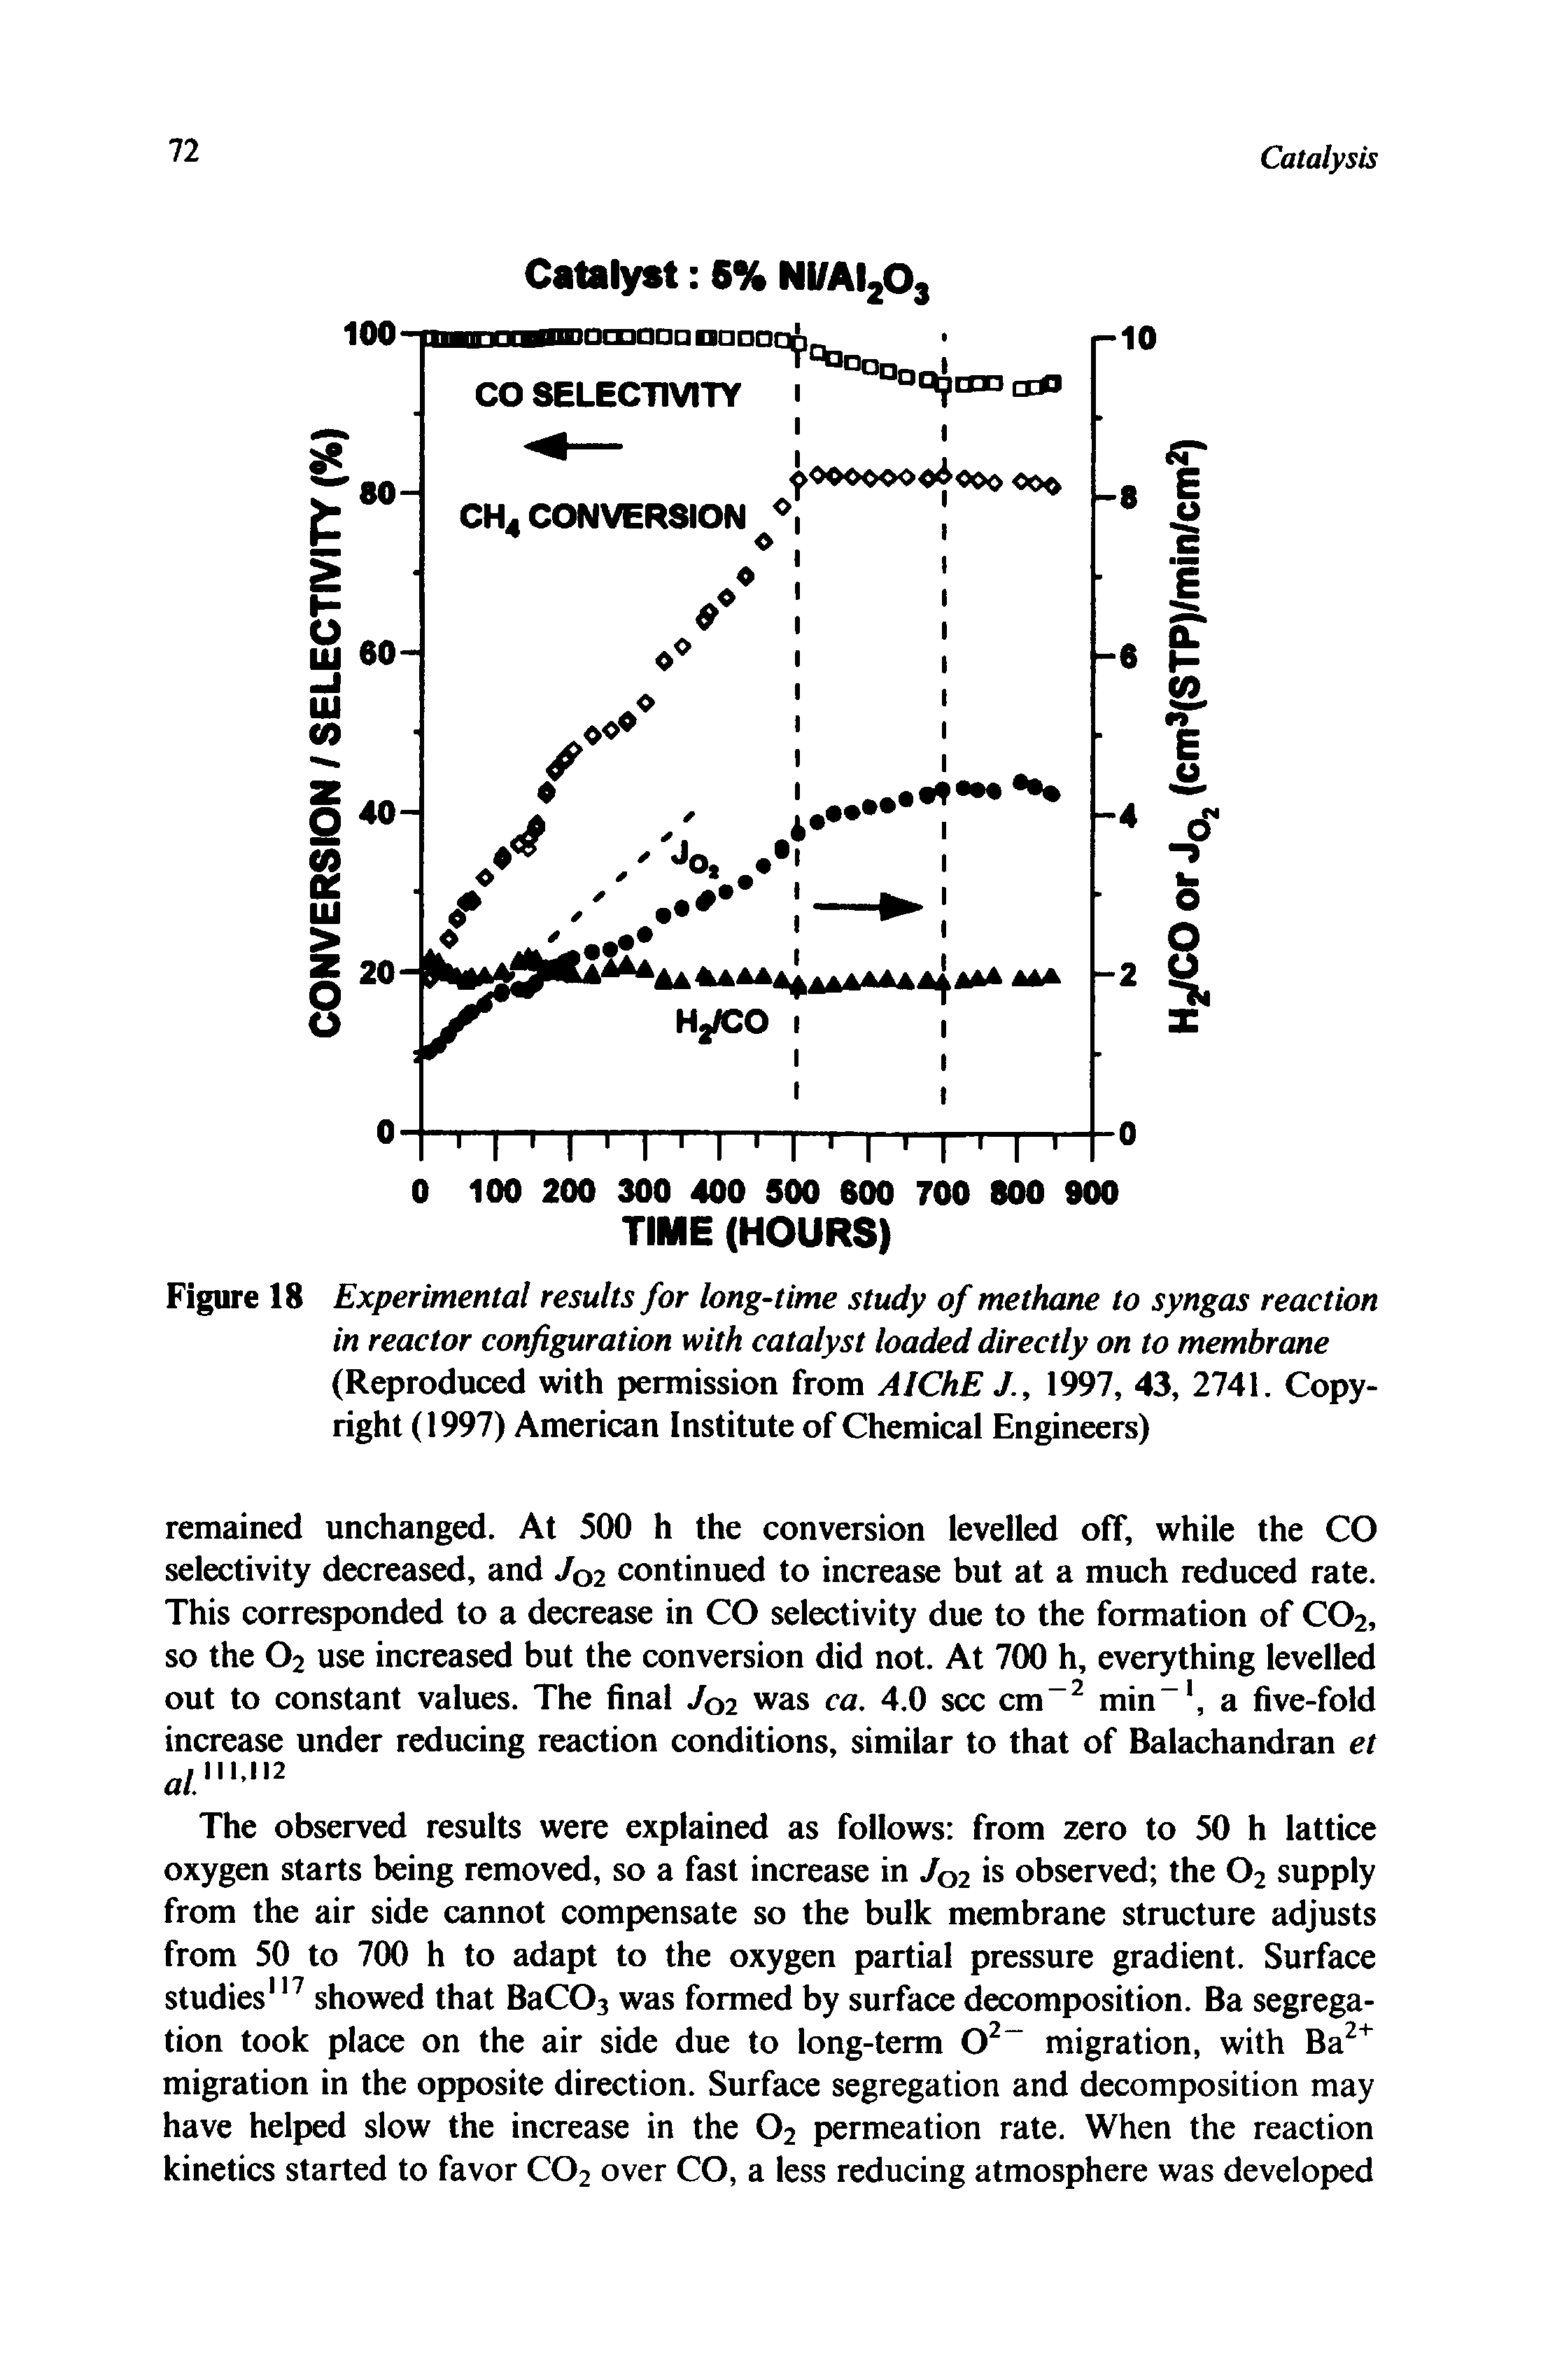 Figure 18 Experimental results for long-time study of methane to syngas reaction in reactor configuration with catalyst loaded directly on to membrane (Reproduced with permission from AIChE J., 1997, 43, 2741. Copyright (1997) American Institute of Chemical Engineers)...